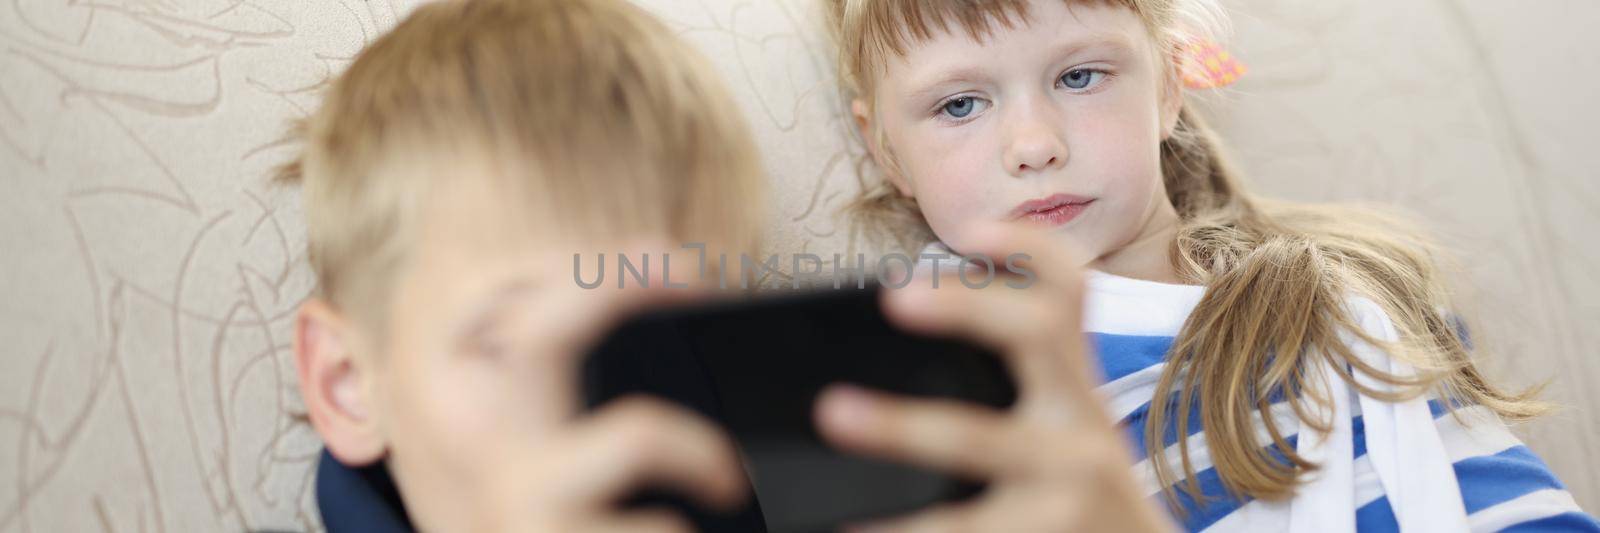 Portrait of brother and sister at home on sofa watching on smartphone screen. Kids use modern technology from young age. Addict, holiday, siblings concept